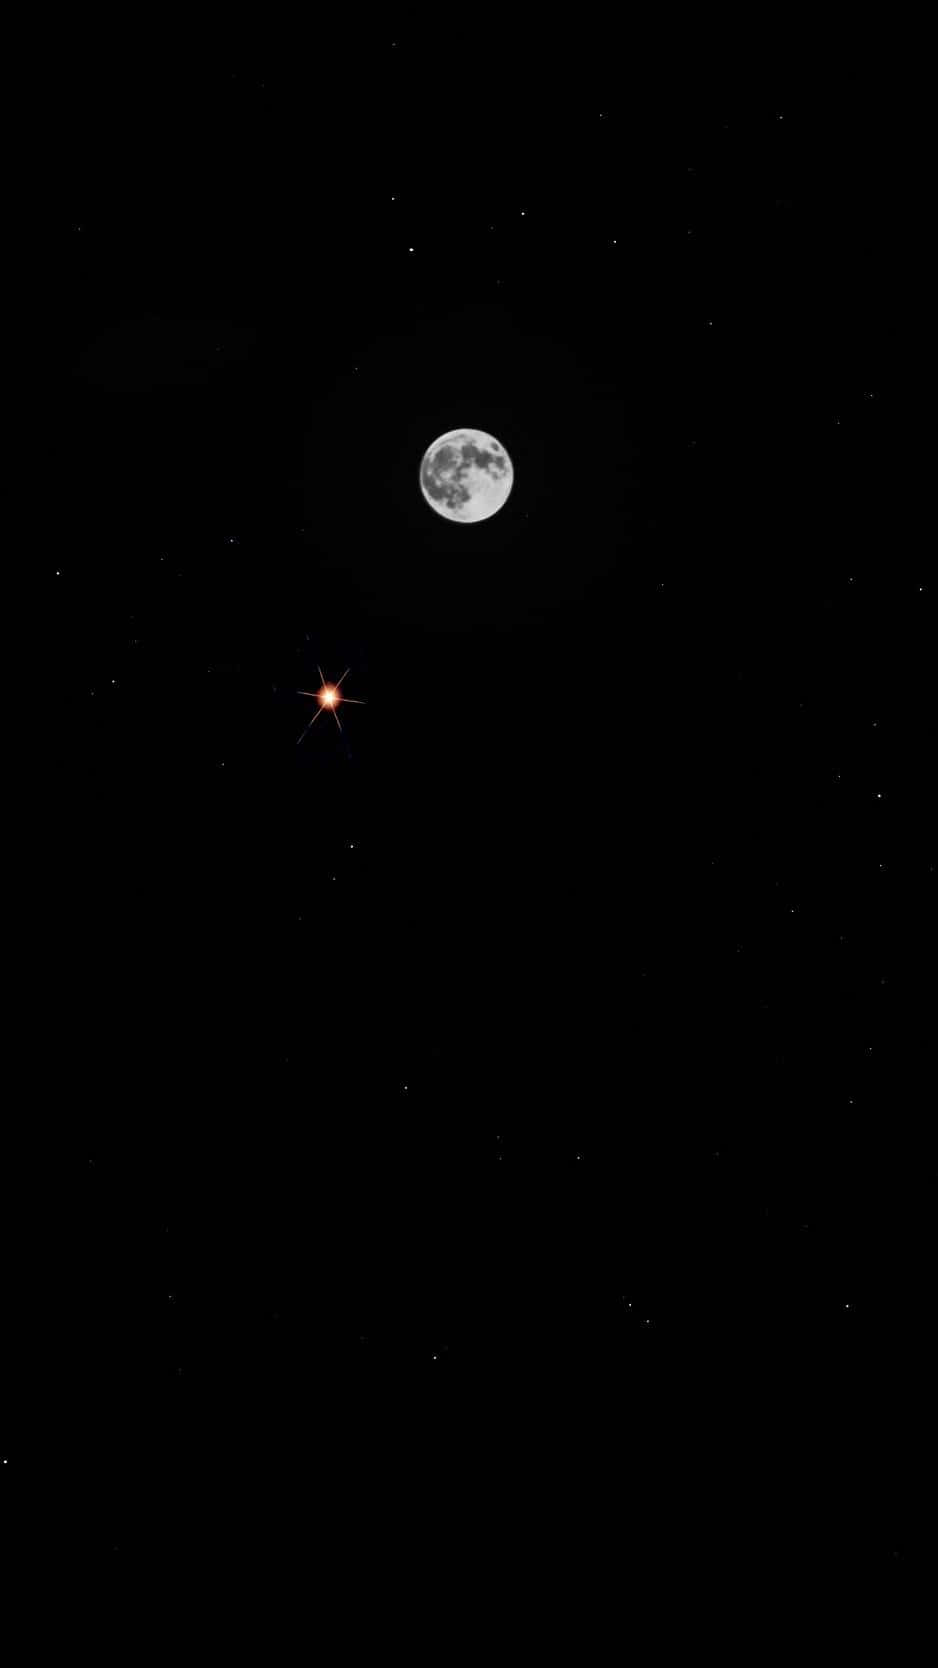 Dive Into a Star-Studded Evening with Moon Iphone Wallpaper